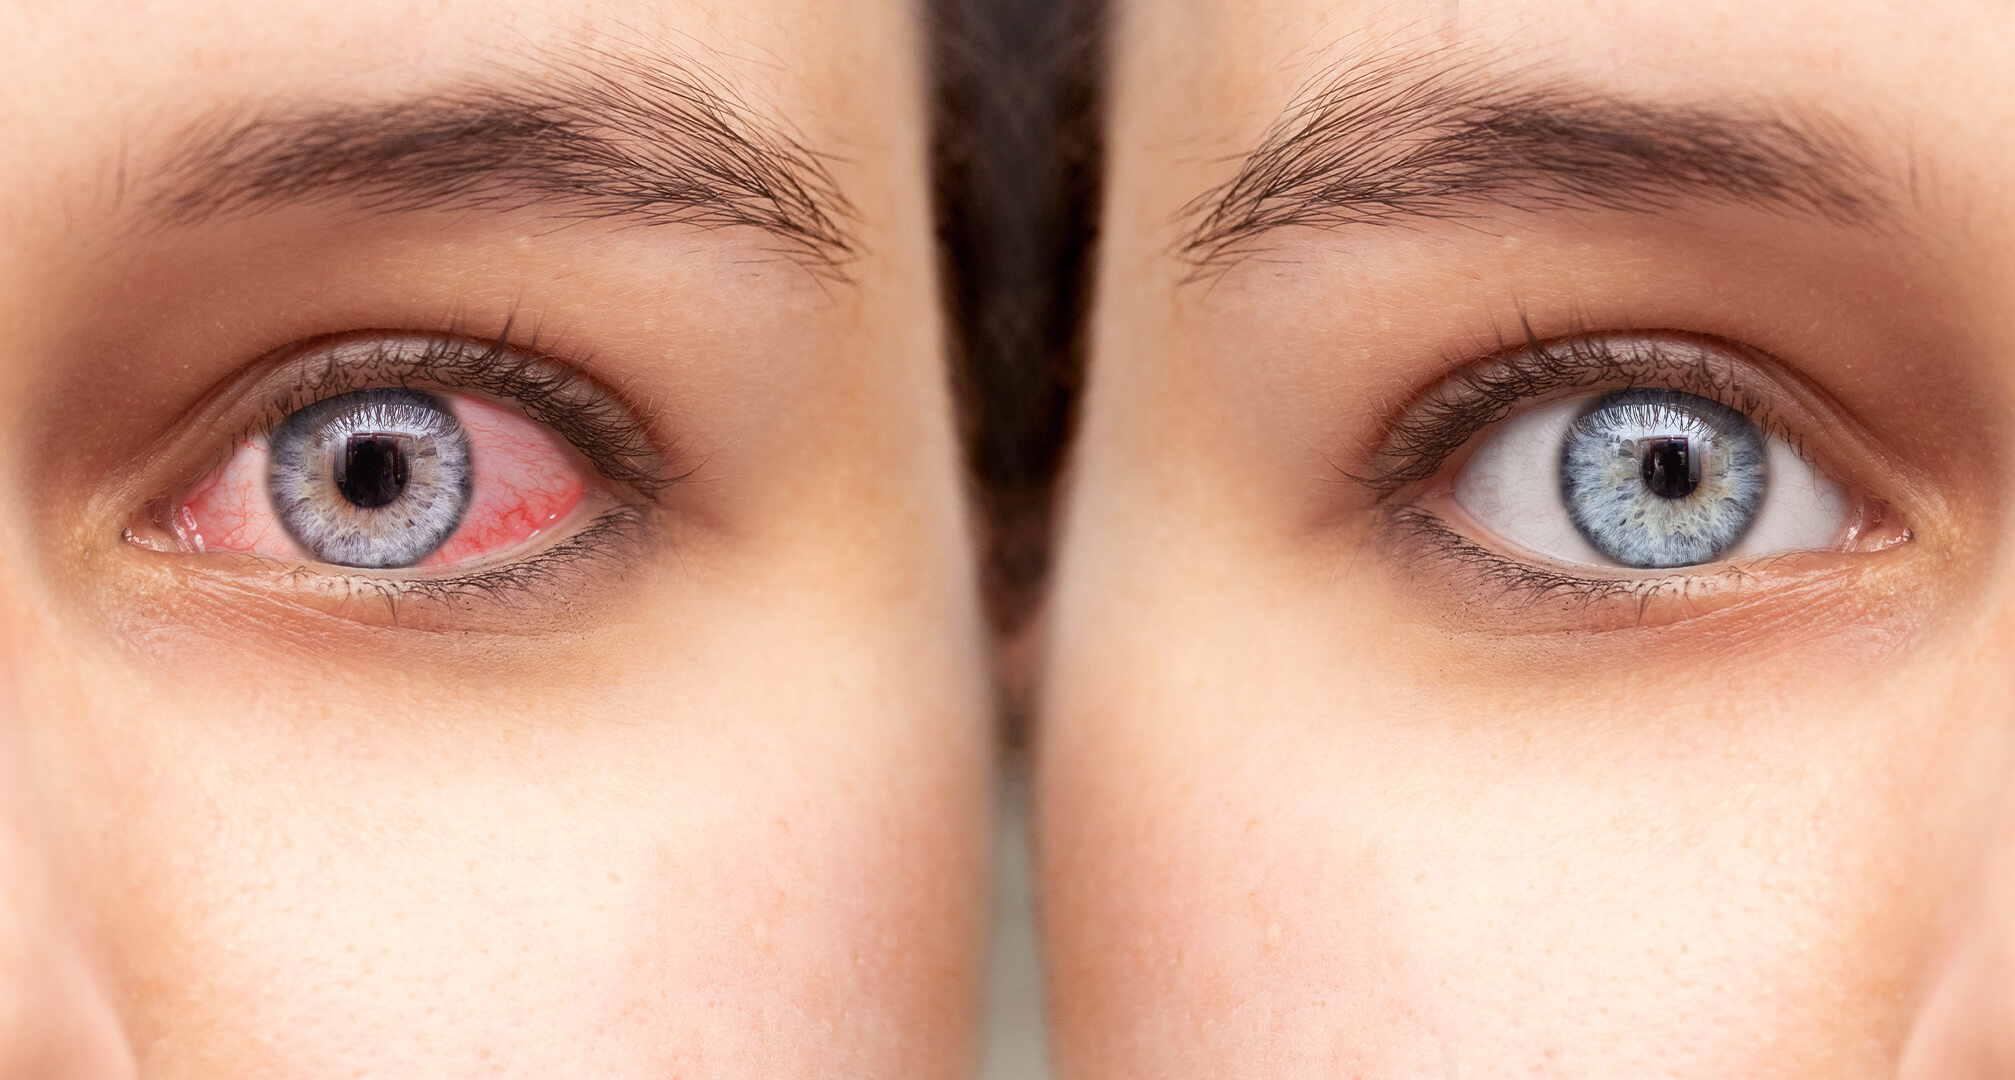 close up of two eyes side by side, a red dry eye on the left and a healthy eye on the right